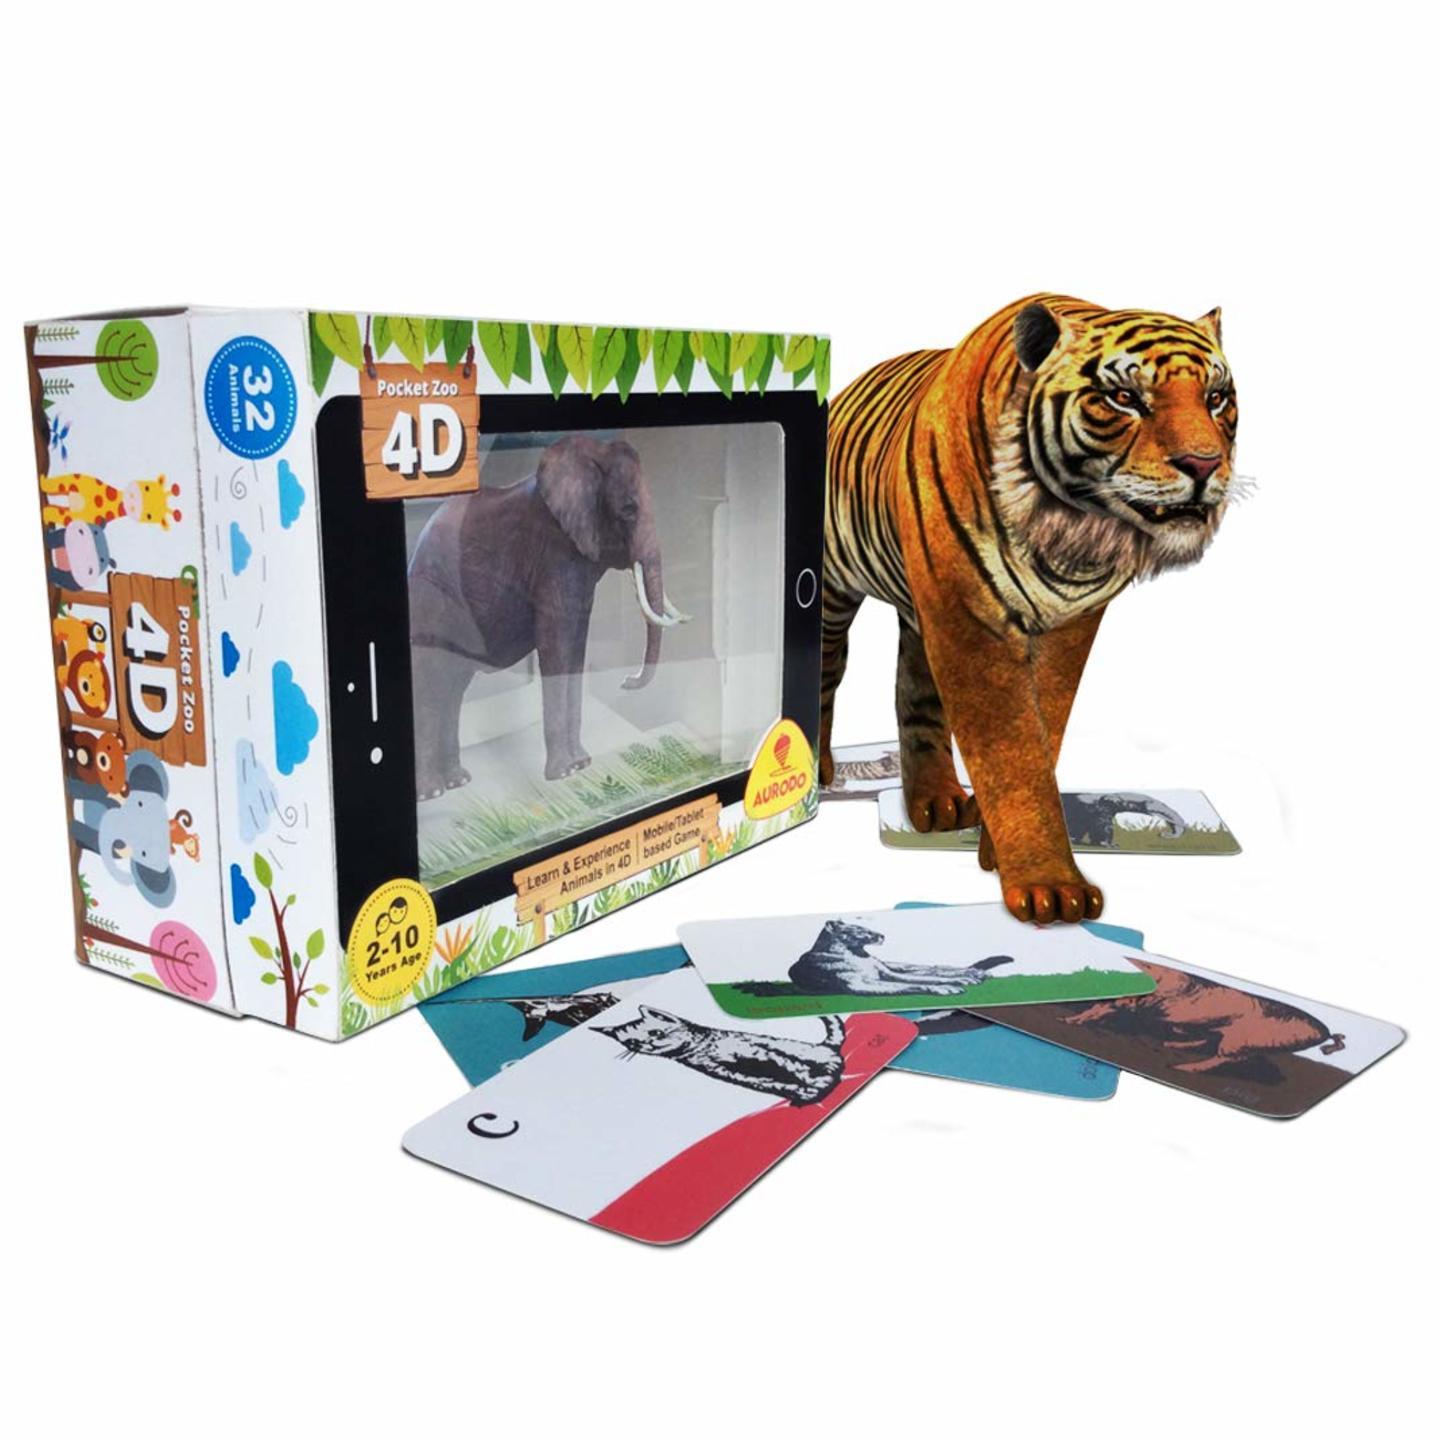 Pocket Zoo 4D Augmented Reality Learning Game